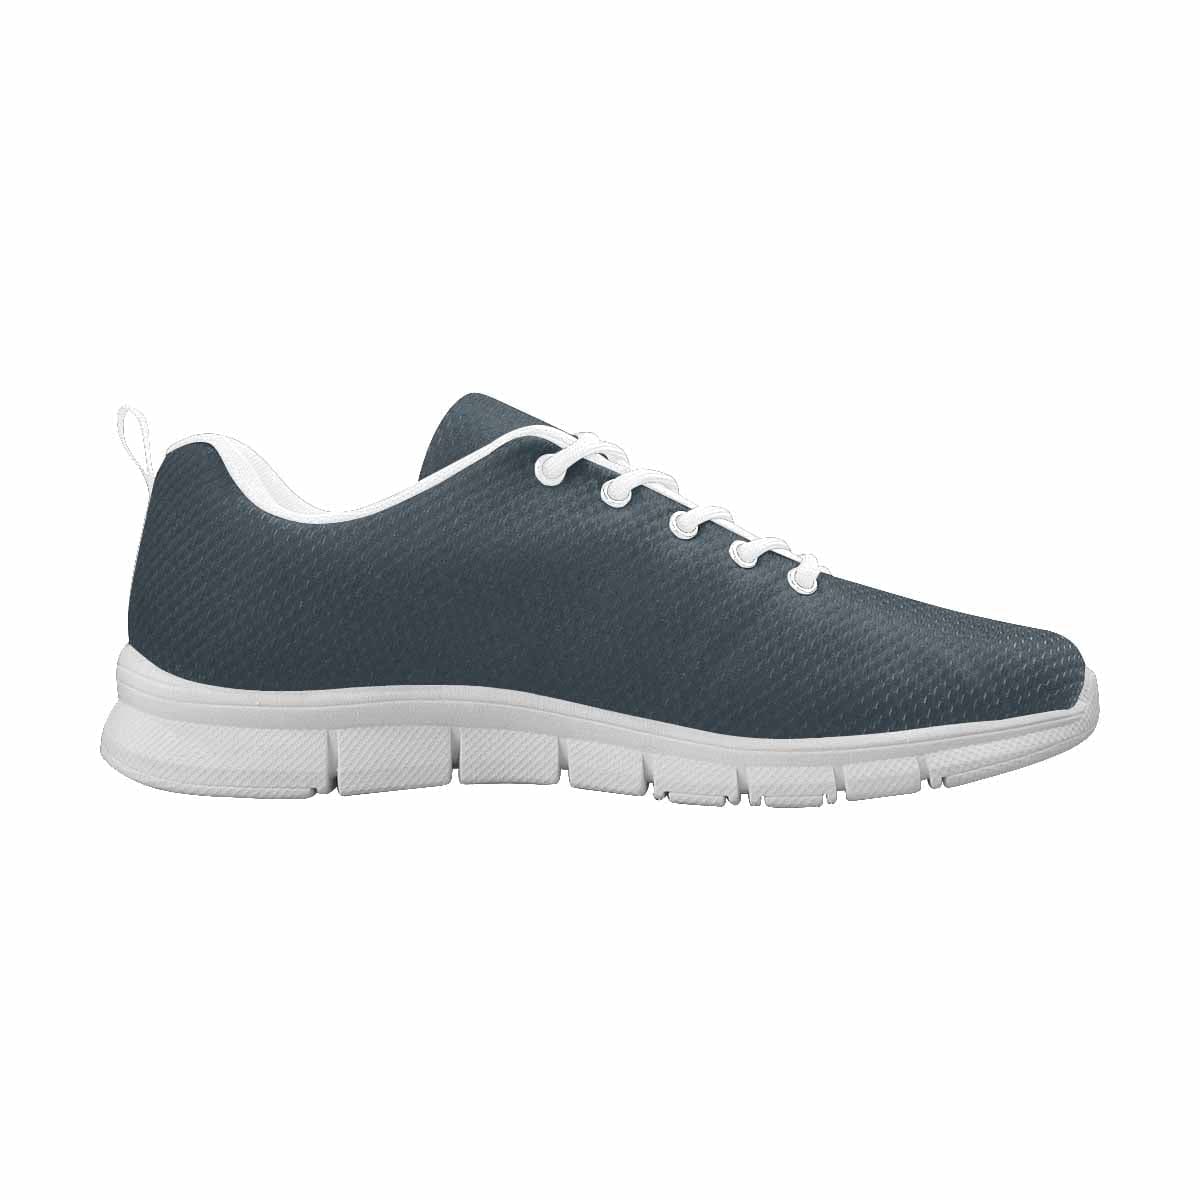 Sneakers For Men Charcoal Black - Running Shoes - Mens | Sneakers | Running